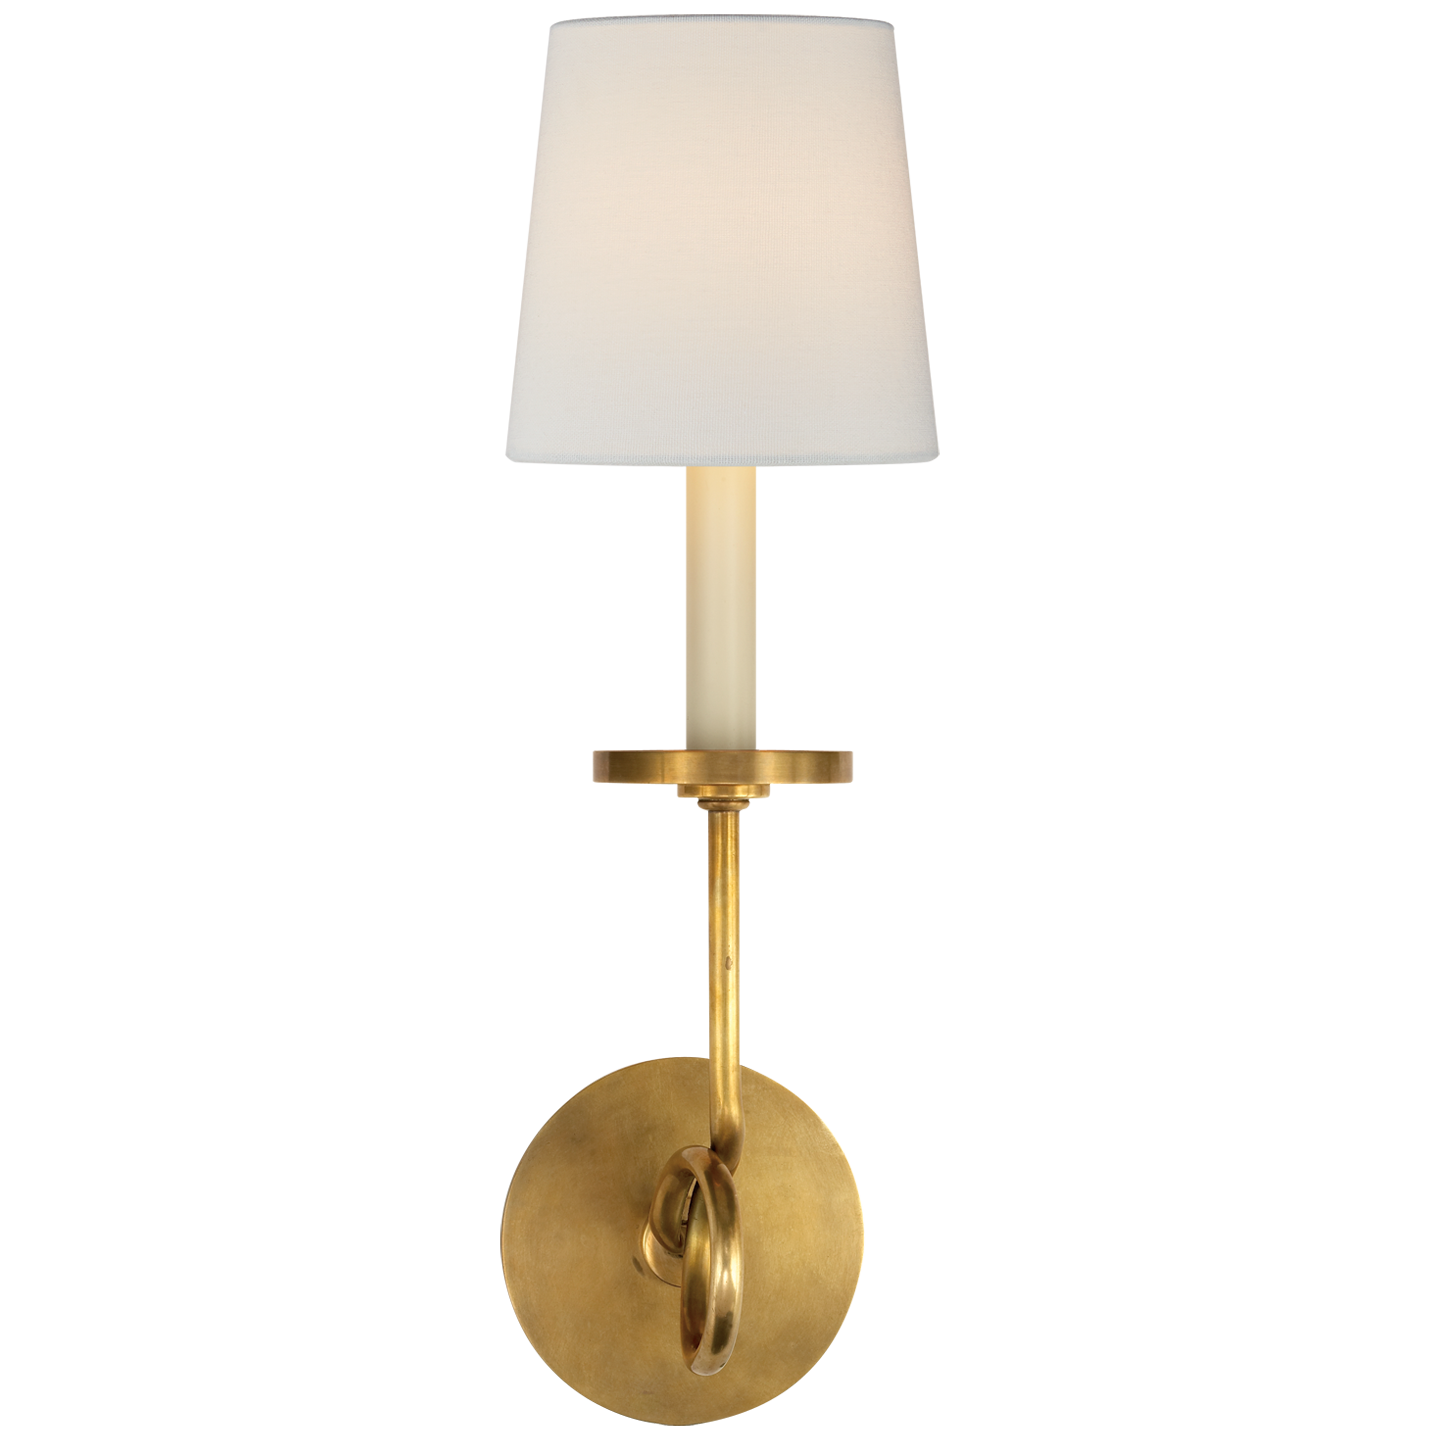 Visual Comfort brass sconce // Classic swing arm sconce in brass